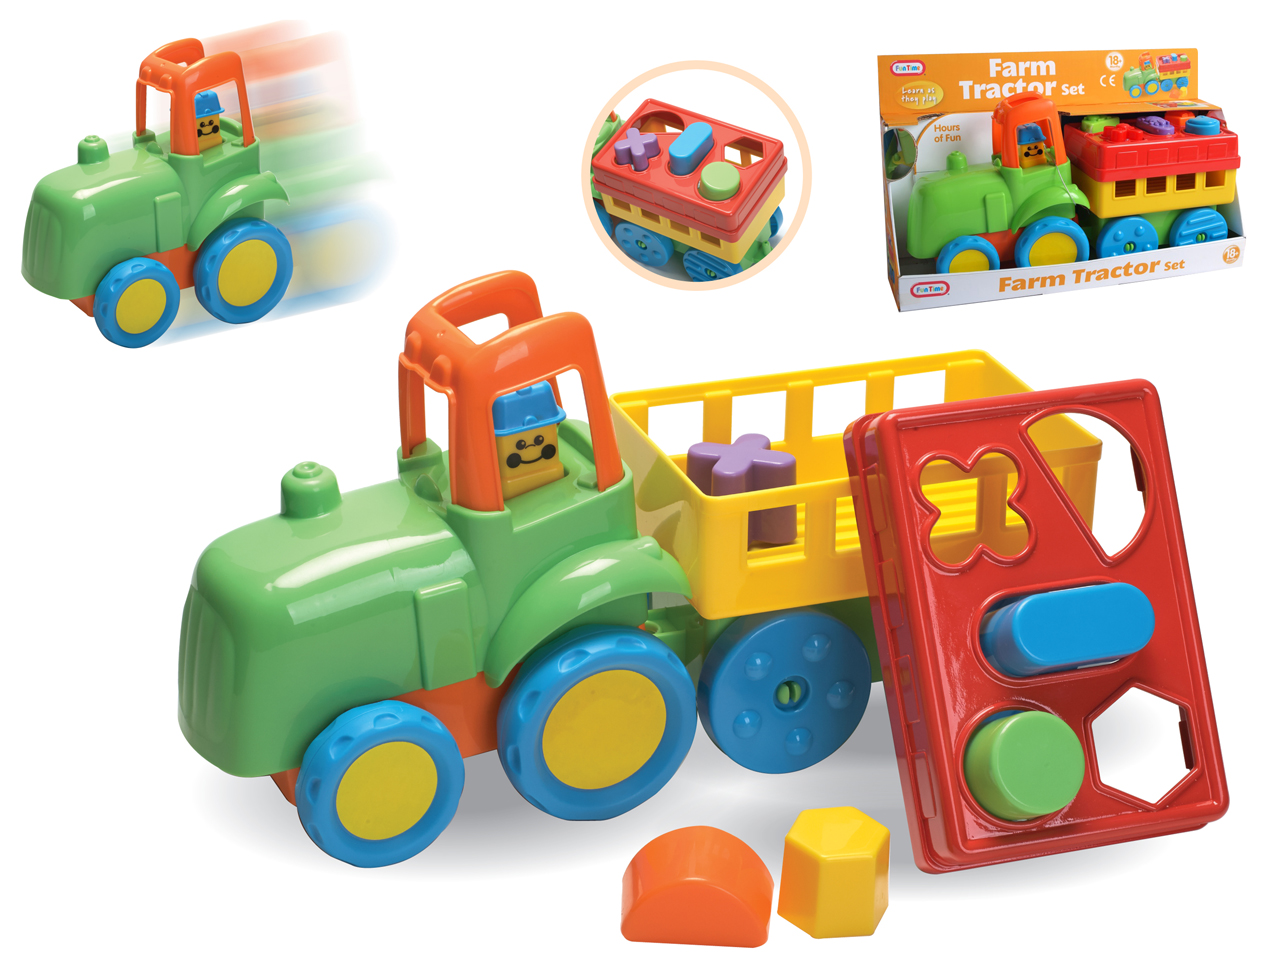 funtime tractor farm playset